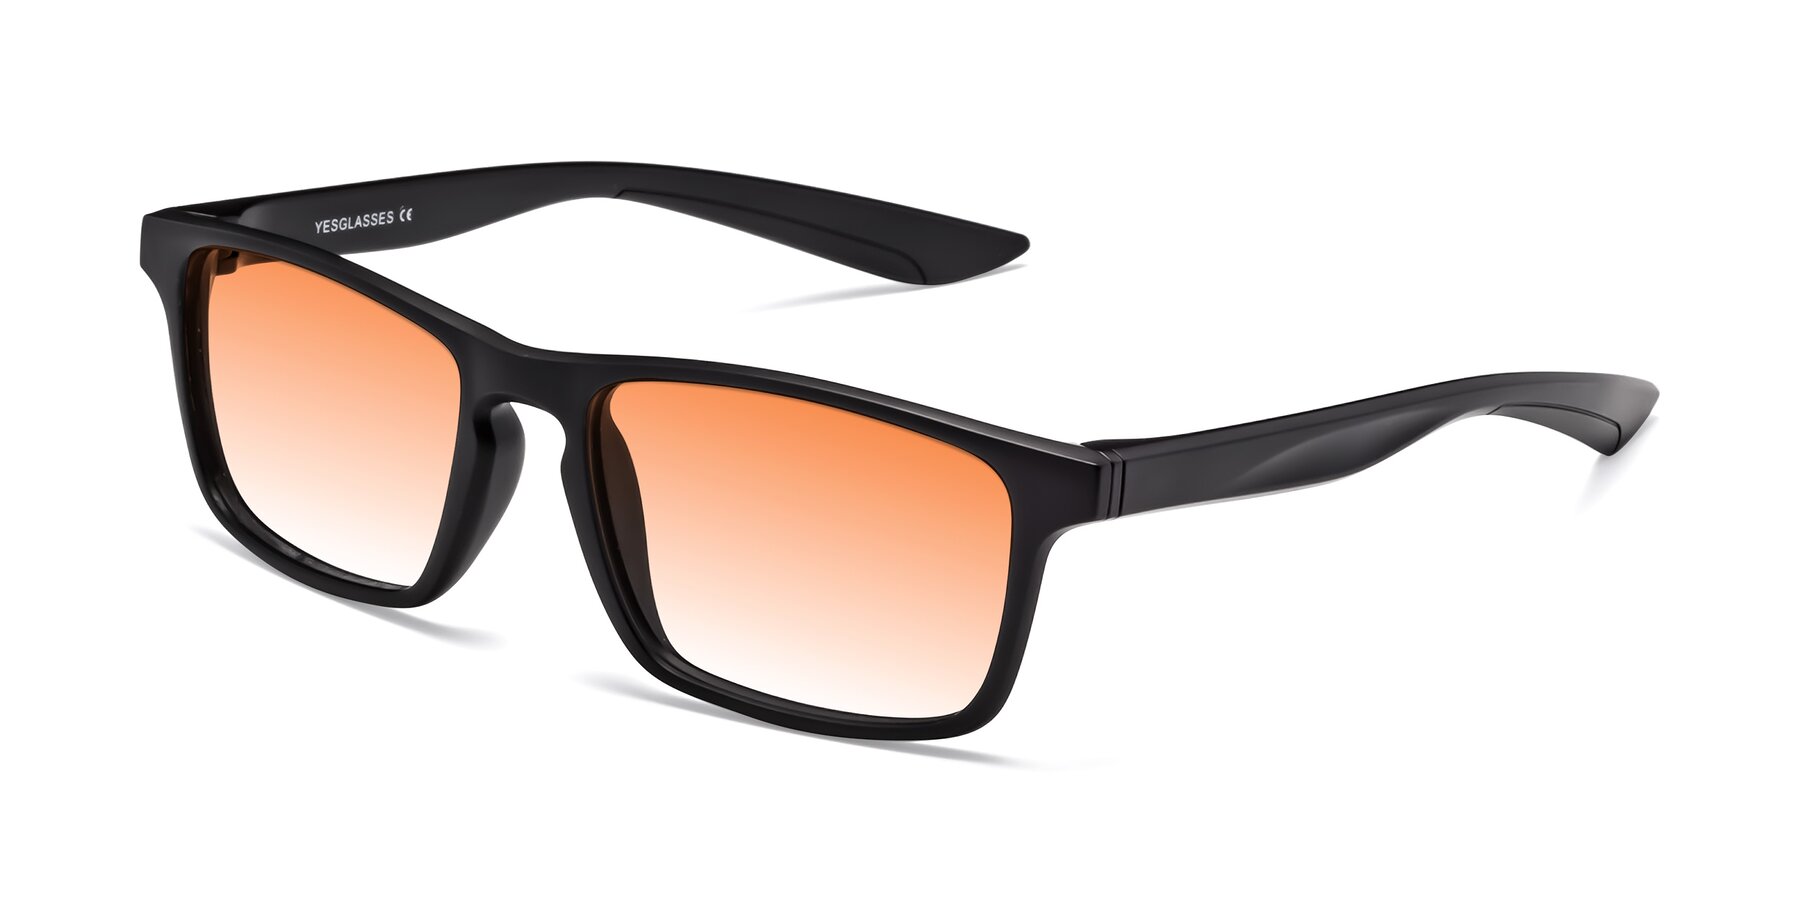 Angle of Passion in Matte Black with Orange Gradient Lenses